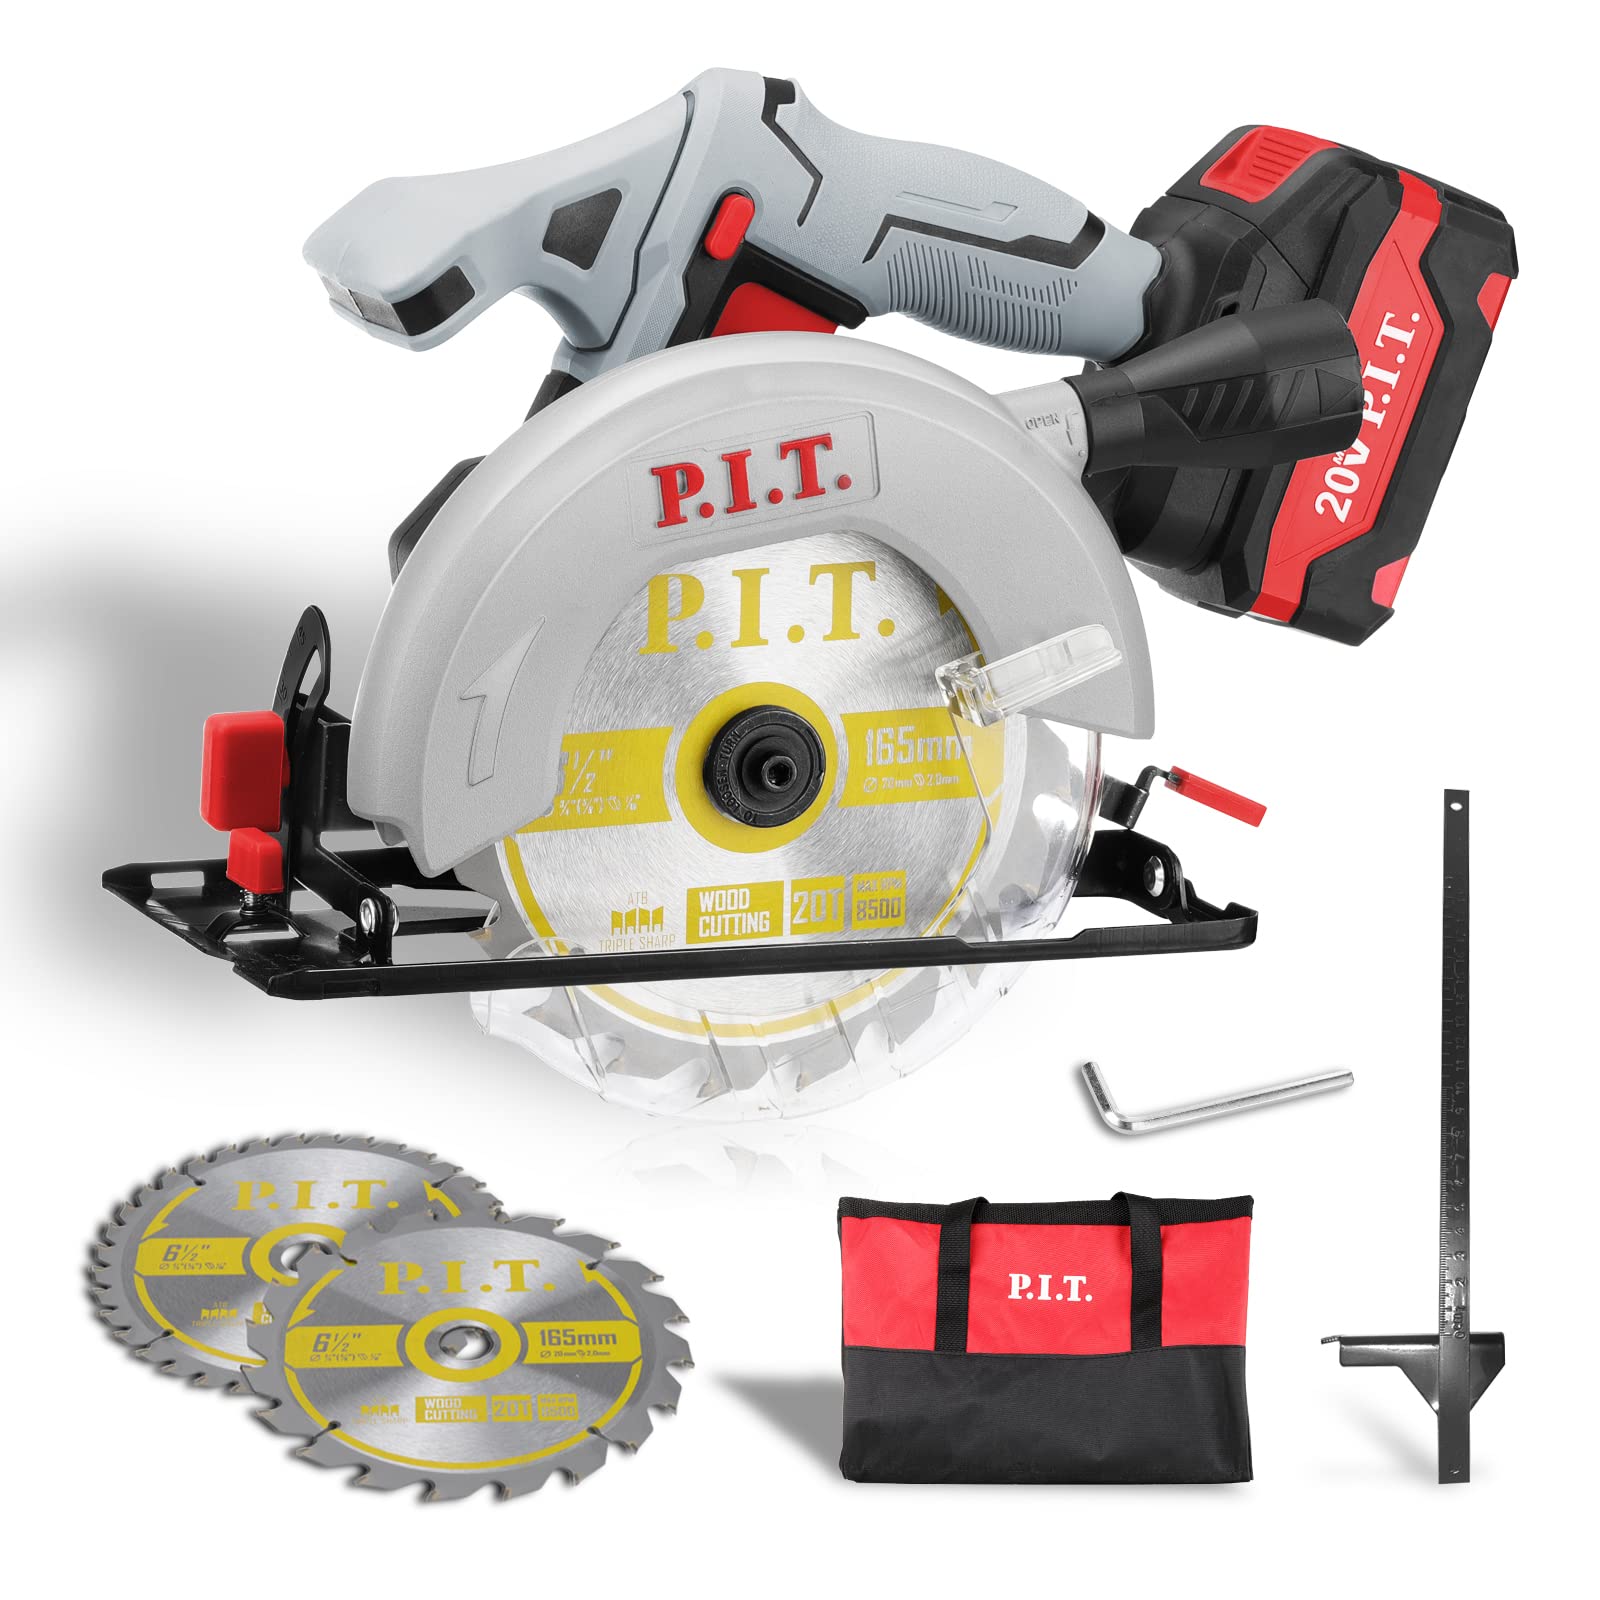 P.I.T. 20V 6-12 inch Cordless Circular Saw with 4.0Ah Lithium-Ion Battery and 24T 40T Circular Saw Blade Max Cutting Depth